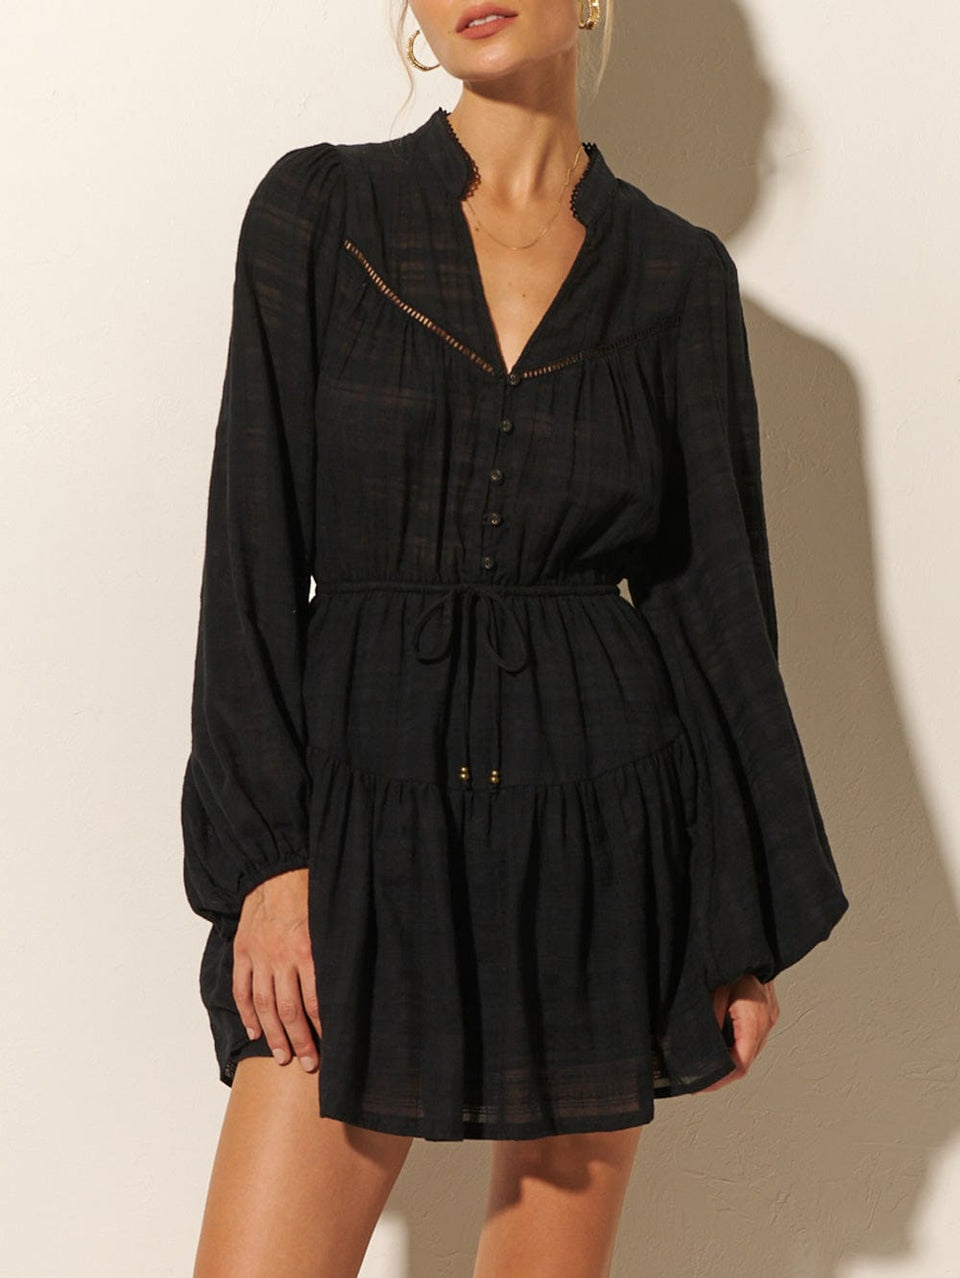 Close-up: Studio model wears the KIVARI Rafaelle Mini Dress: a black dress made from cotton check featuring a button-front bodice, full-length blouson sleeves, drawstring waist and gathered hem frill.